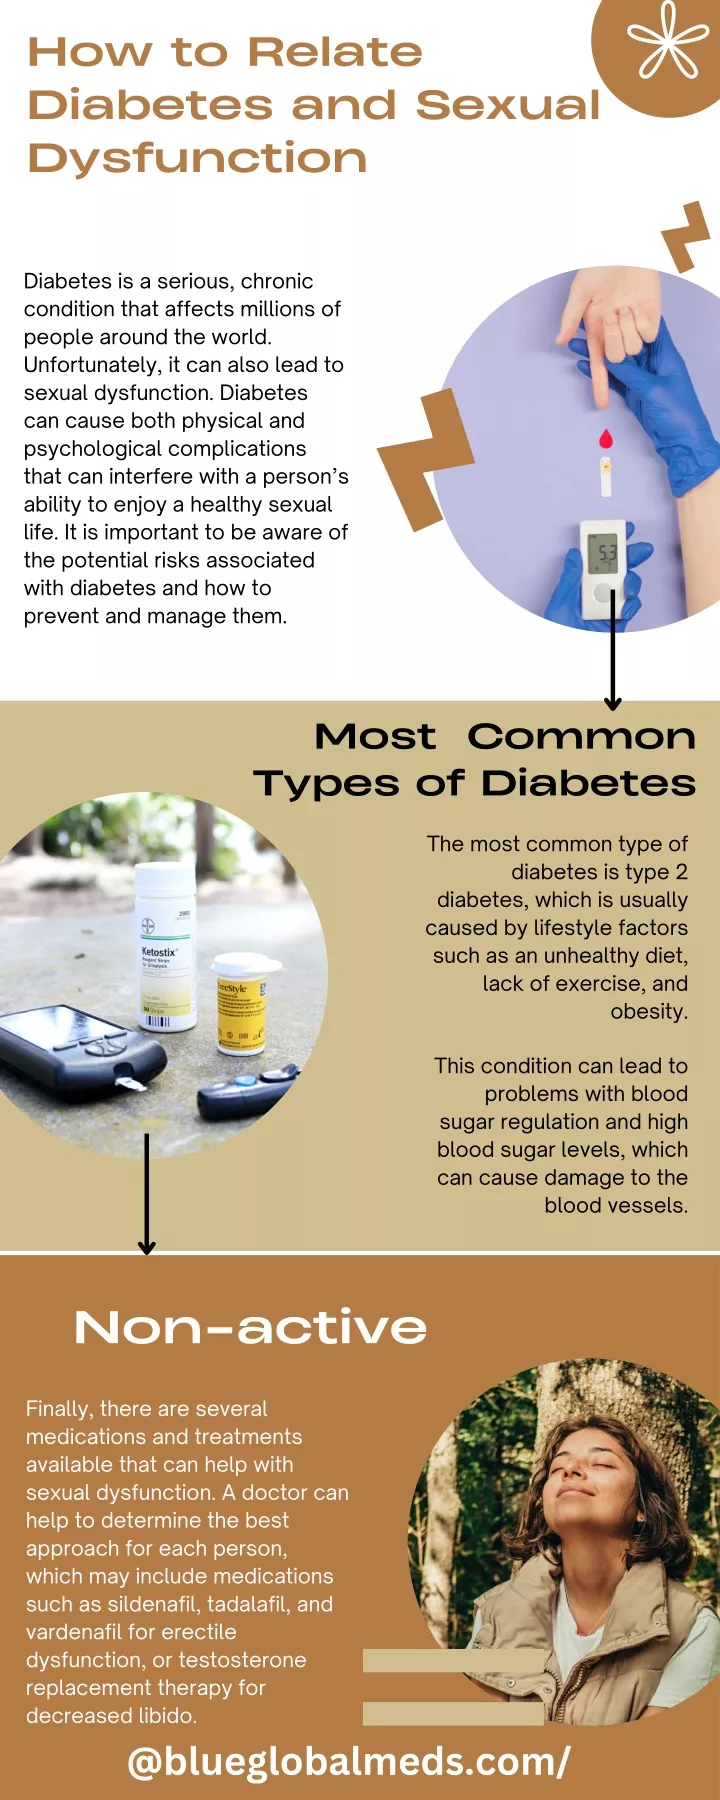 how to relate diabetes and sexual dysfunction